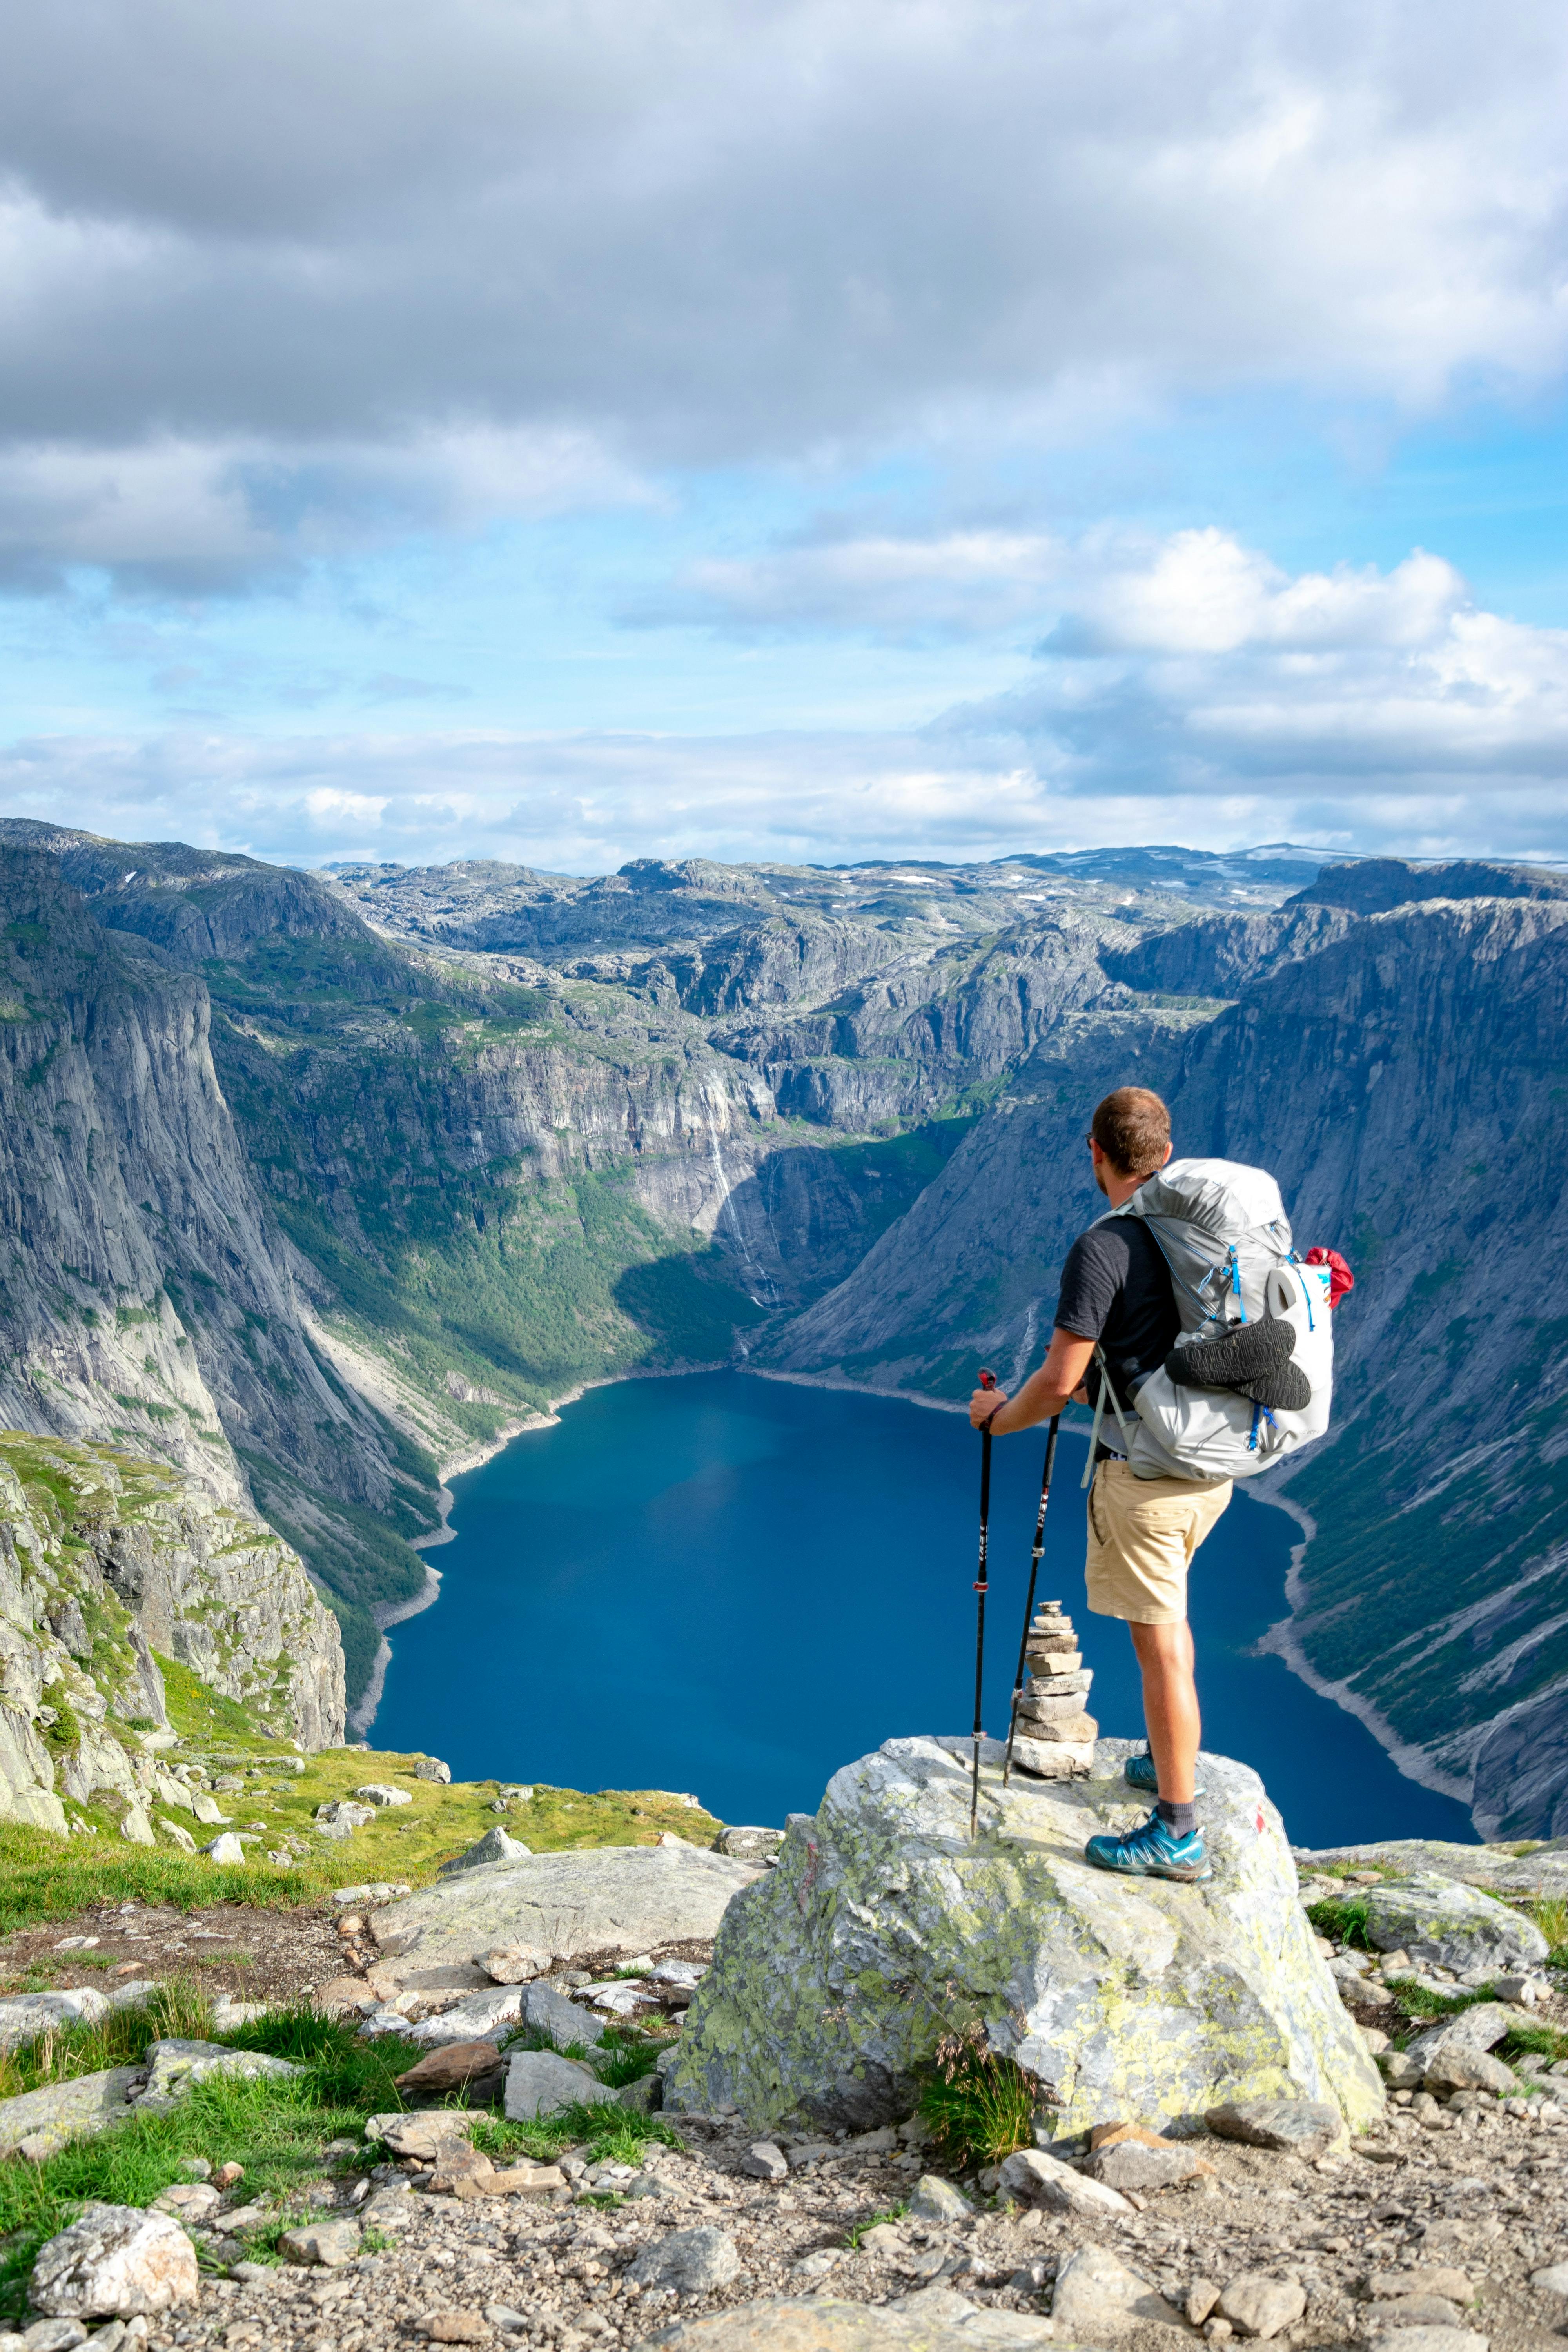 A man stands on a rock sitting on a peak that overlooks a wide valley filled with a lake. He's in an alpine environment with rocky terrain and low-lying plant life. He wears trail runners.